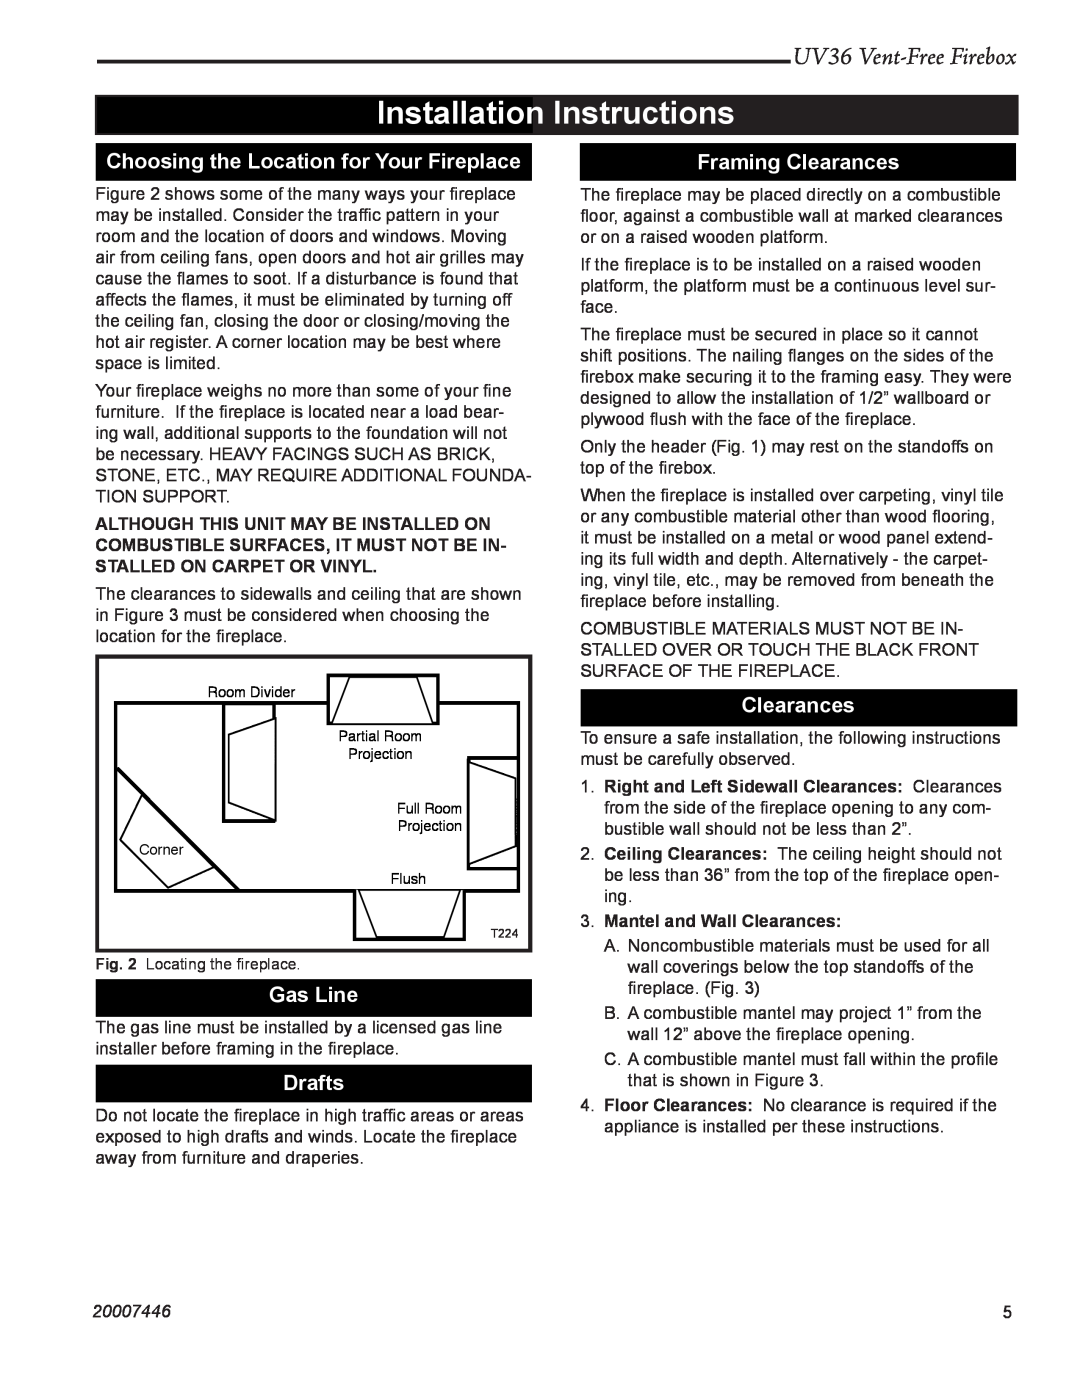 Majestic Appliances UV36 Installation Instructions, Choosing the Location for Your Fireplace, Framing Clearances, Gas Line 